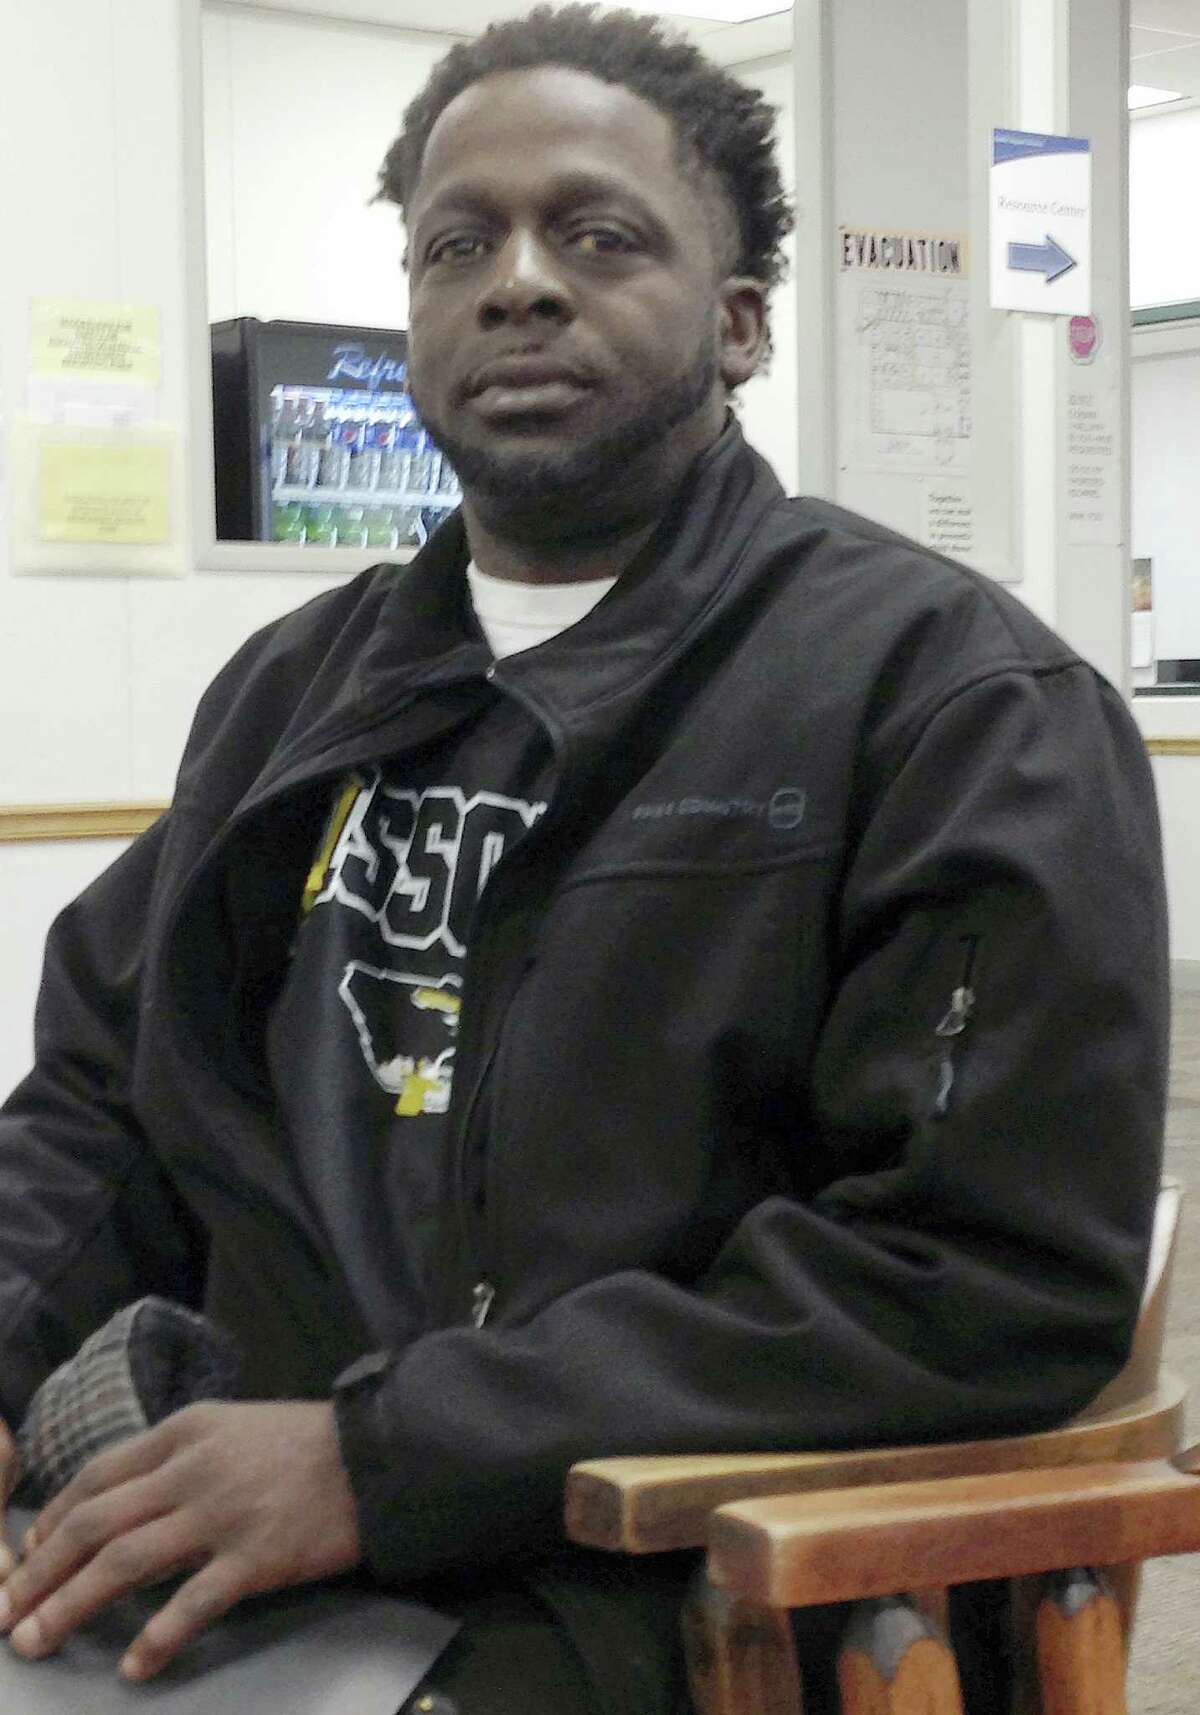 In this Feb 8, 2016 photo, Demetrius White sits in a chair at a state career center in Jefferson City, Mo. White, who is receiving unemployment benefits, had gone to the center to get information about temporary job agencies. He is among the first group of unemployed workers in Missouri whose maximum benefits were cut from 20 weeks to 13 weeks under a state law that took effect in January.